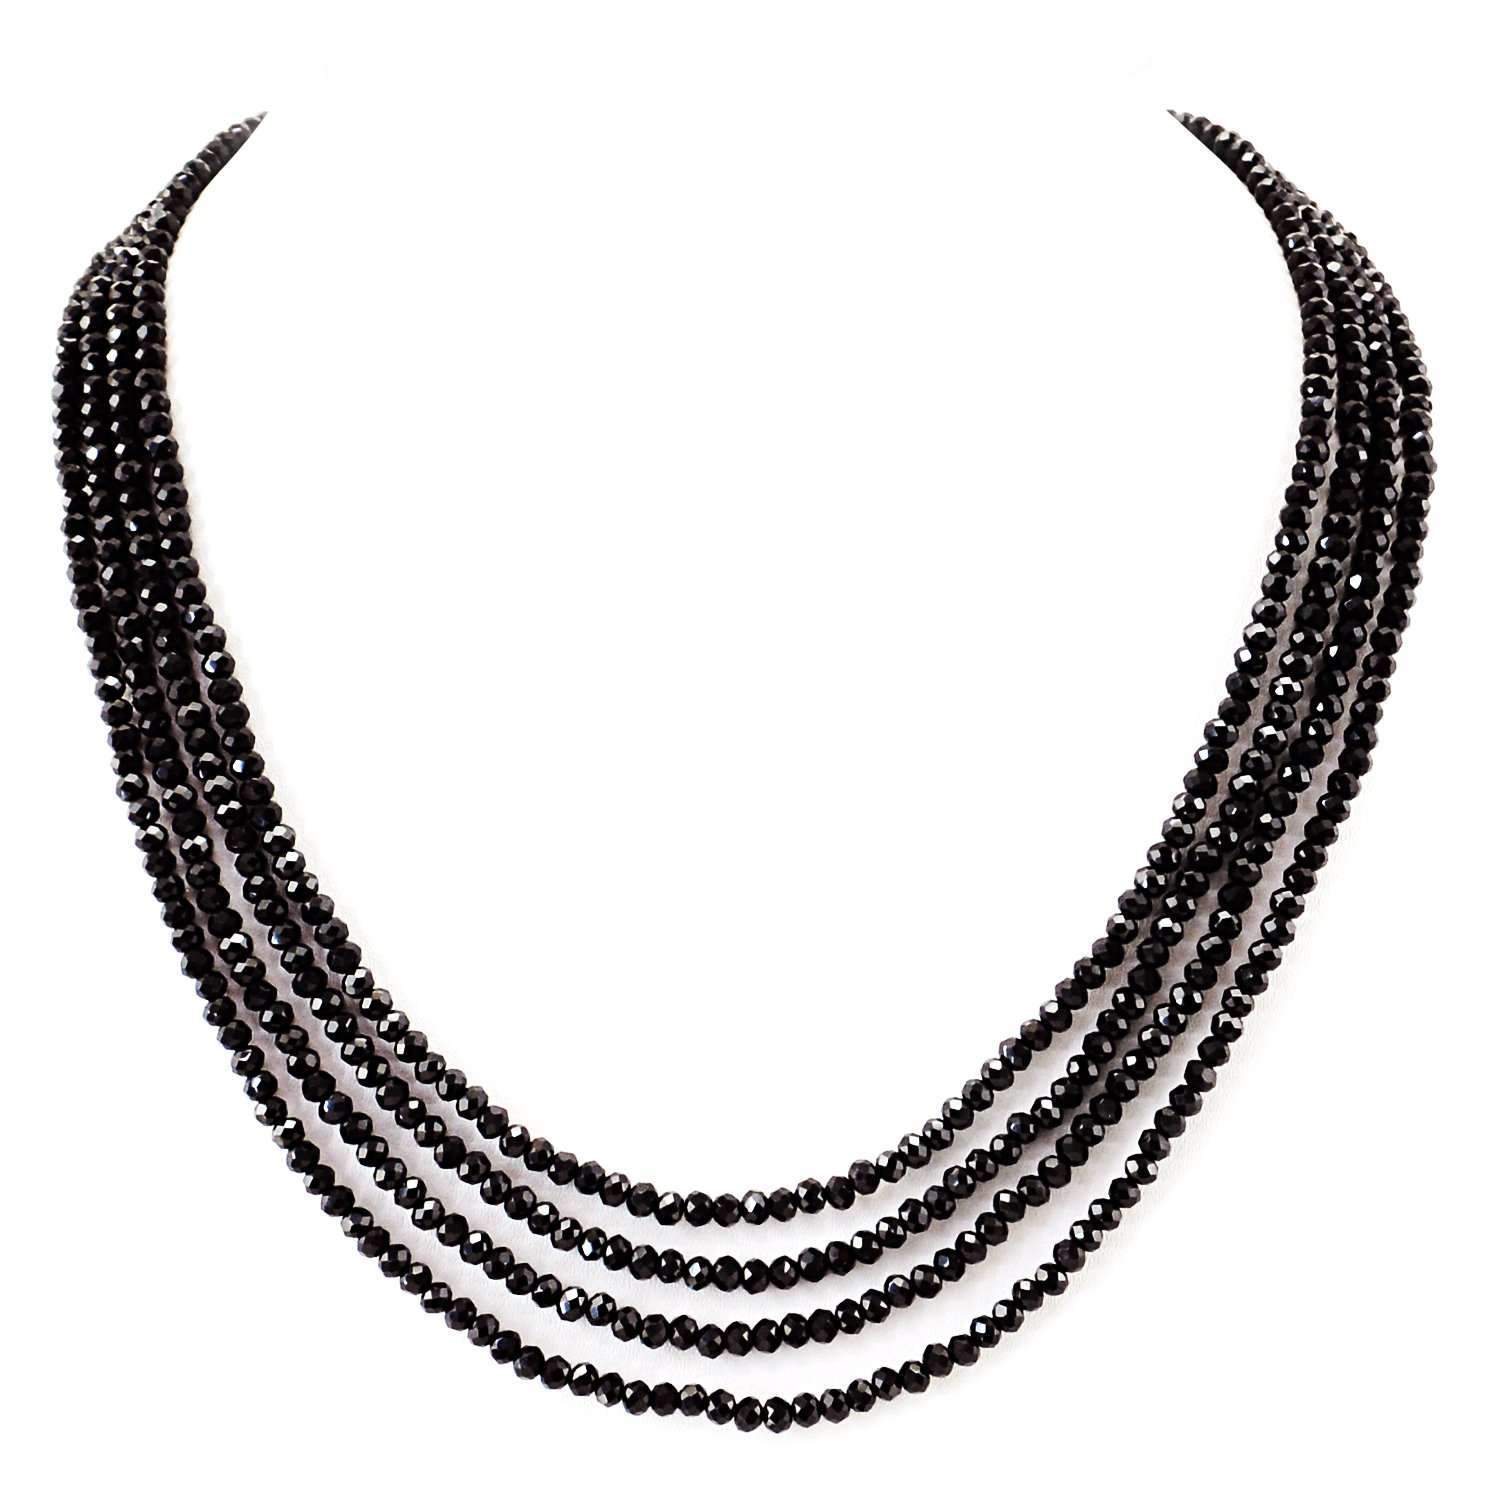 gemsmore:Untreated Black Spinel Necklace Natural 4 Line Round Cut Beads